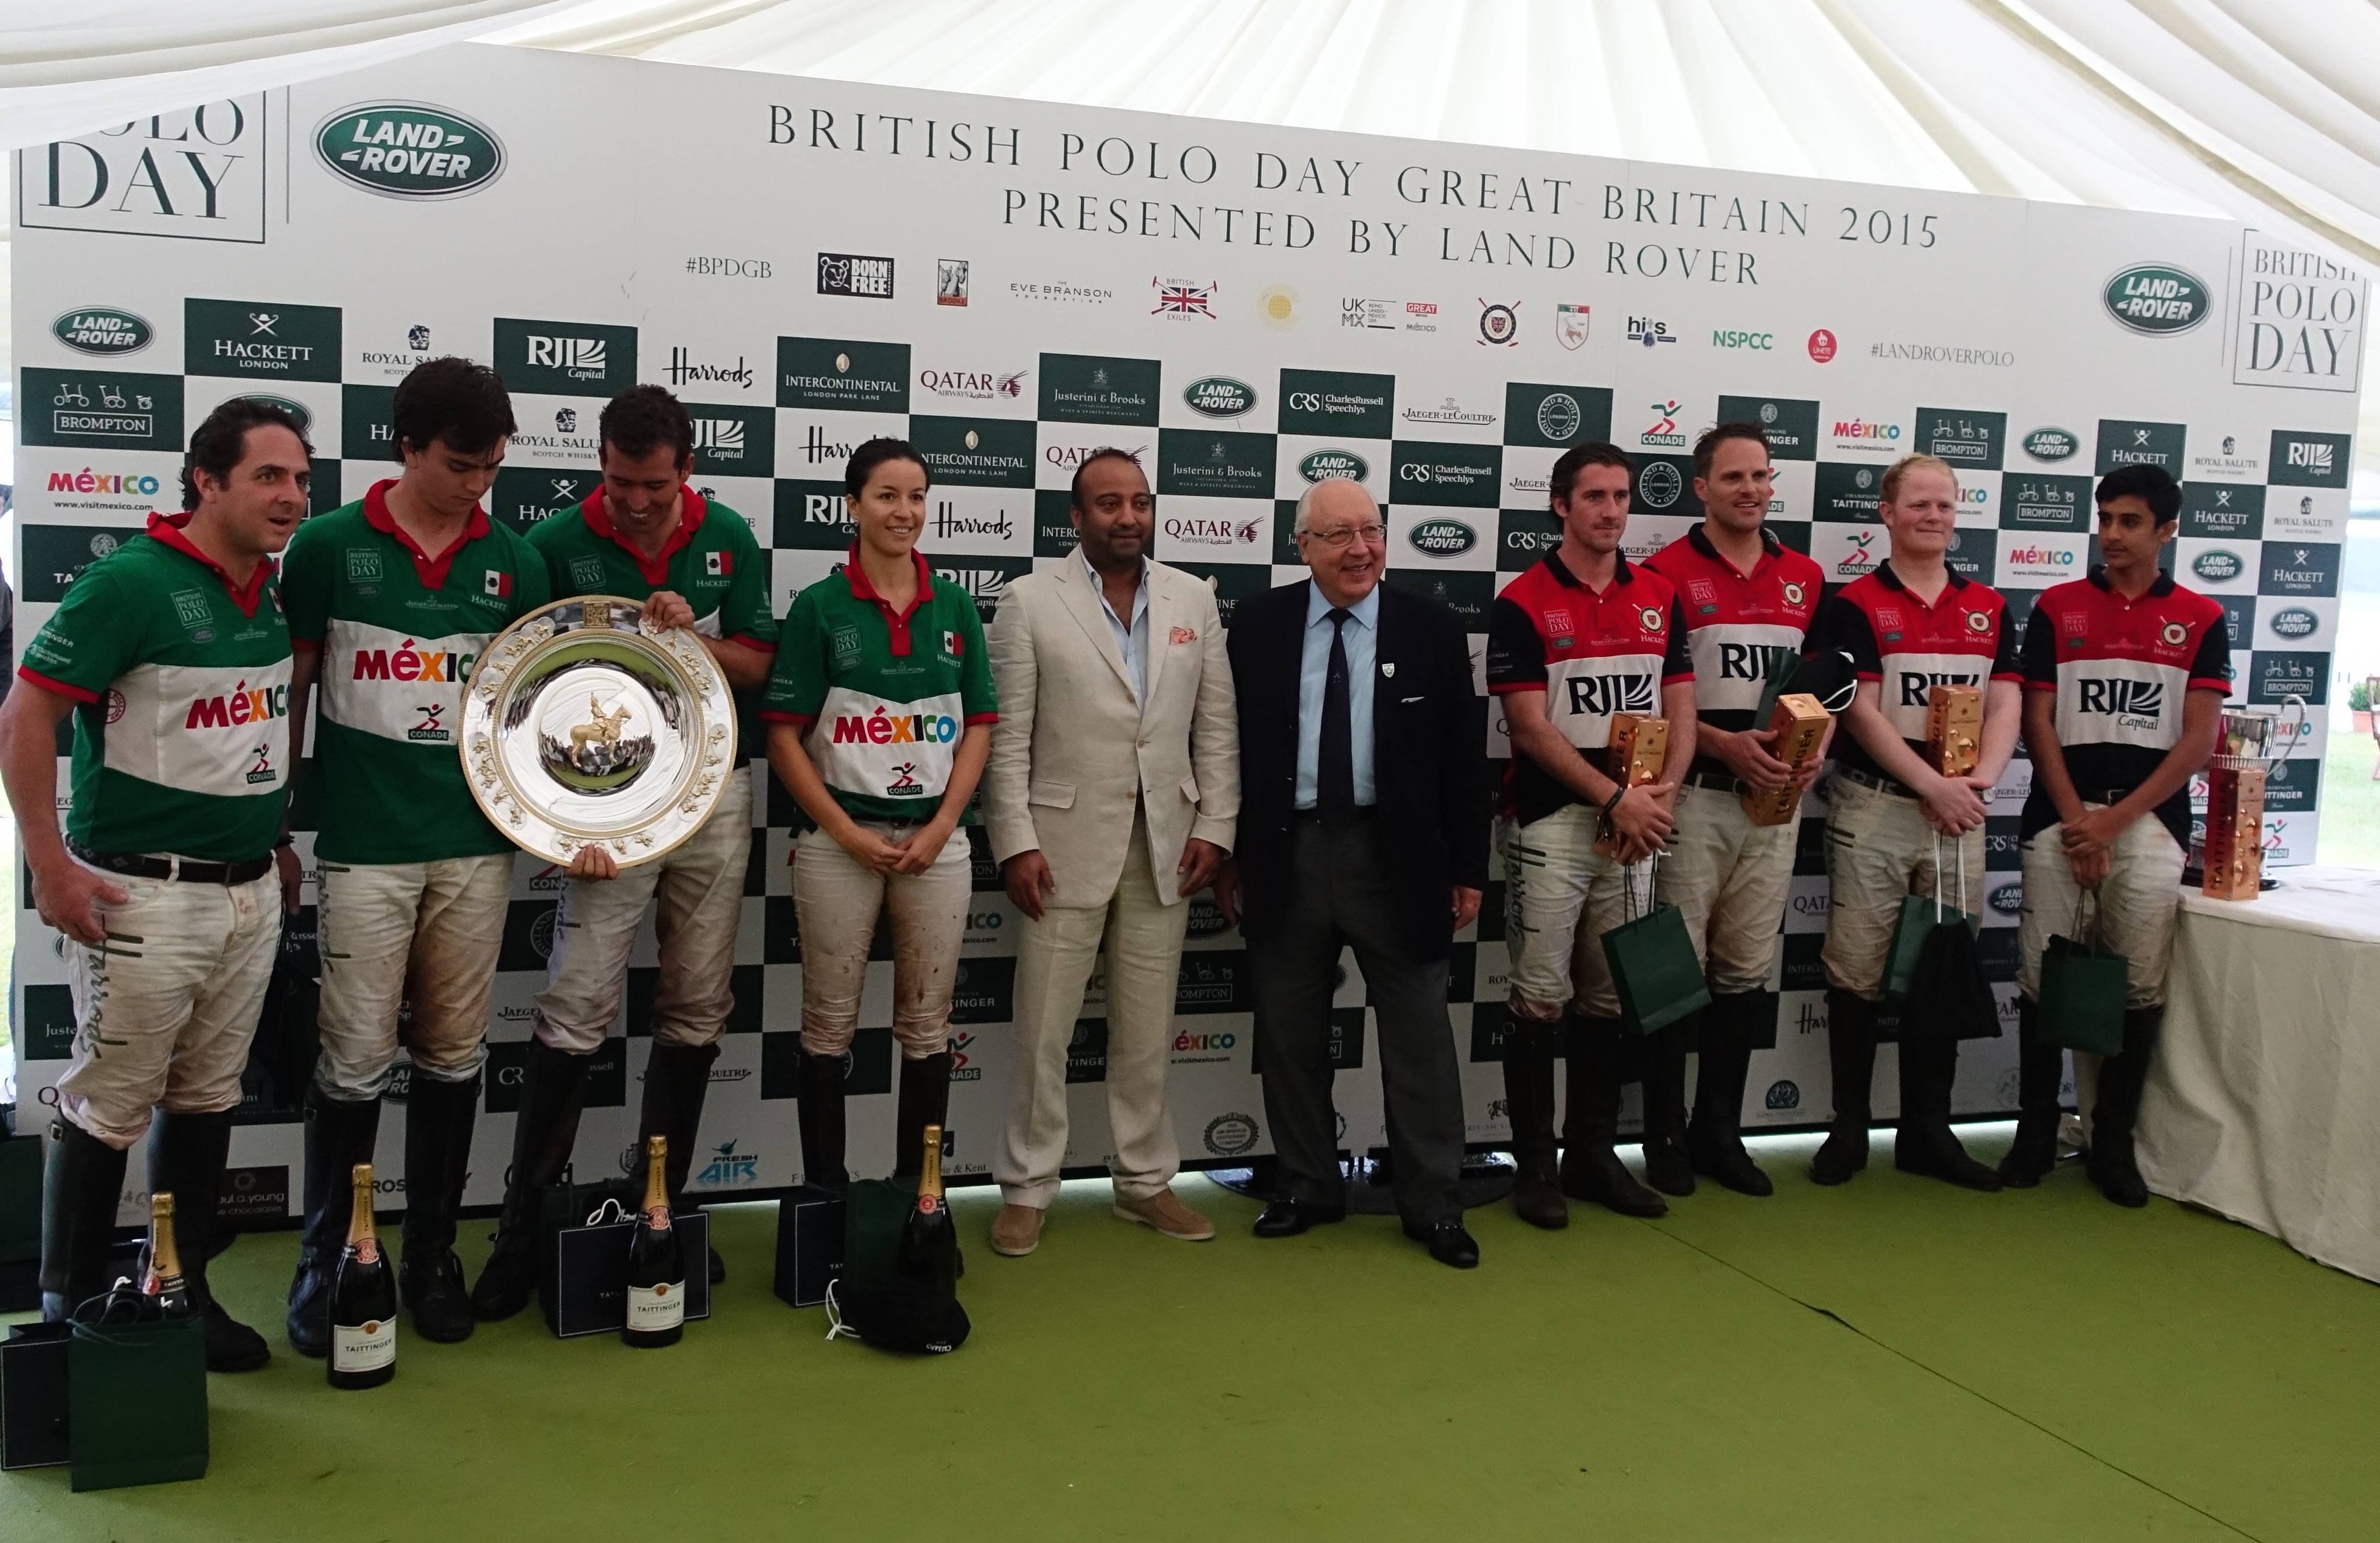 Ron Wahid, CEO of RJI Capital, with host and Swiss financier Urs Schwarzenbach, jointly presented the visiting Mexico team with the Land Rover River Field Plate at the British Polo Day event in Henley-on-Thames on June 20. The Mexico Polo team played against The RJI Capital British Schools Polo Team (pictured on the right).